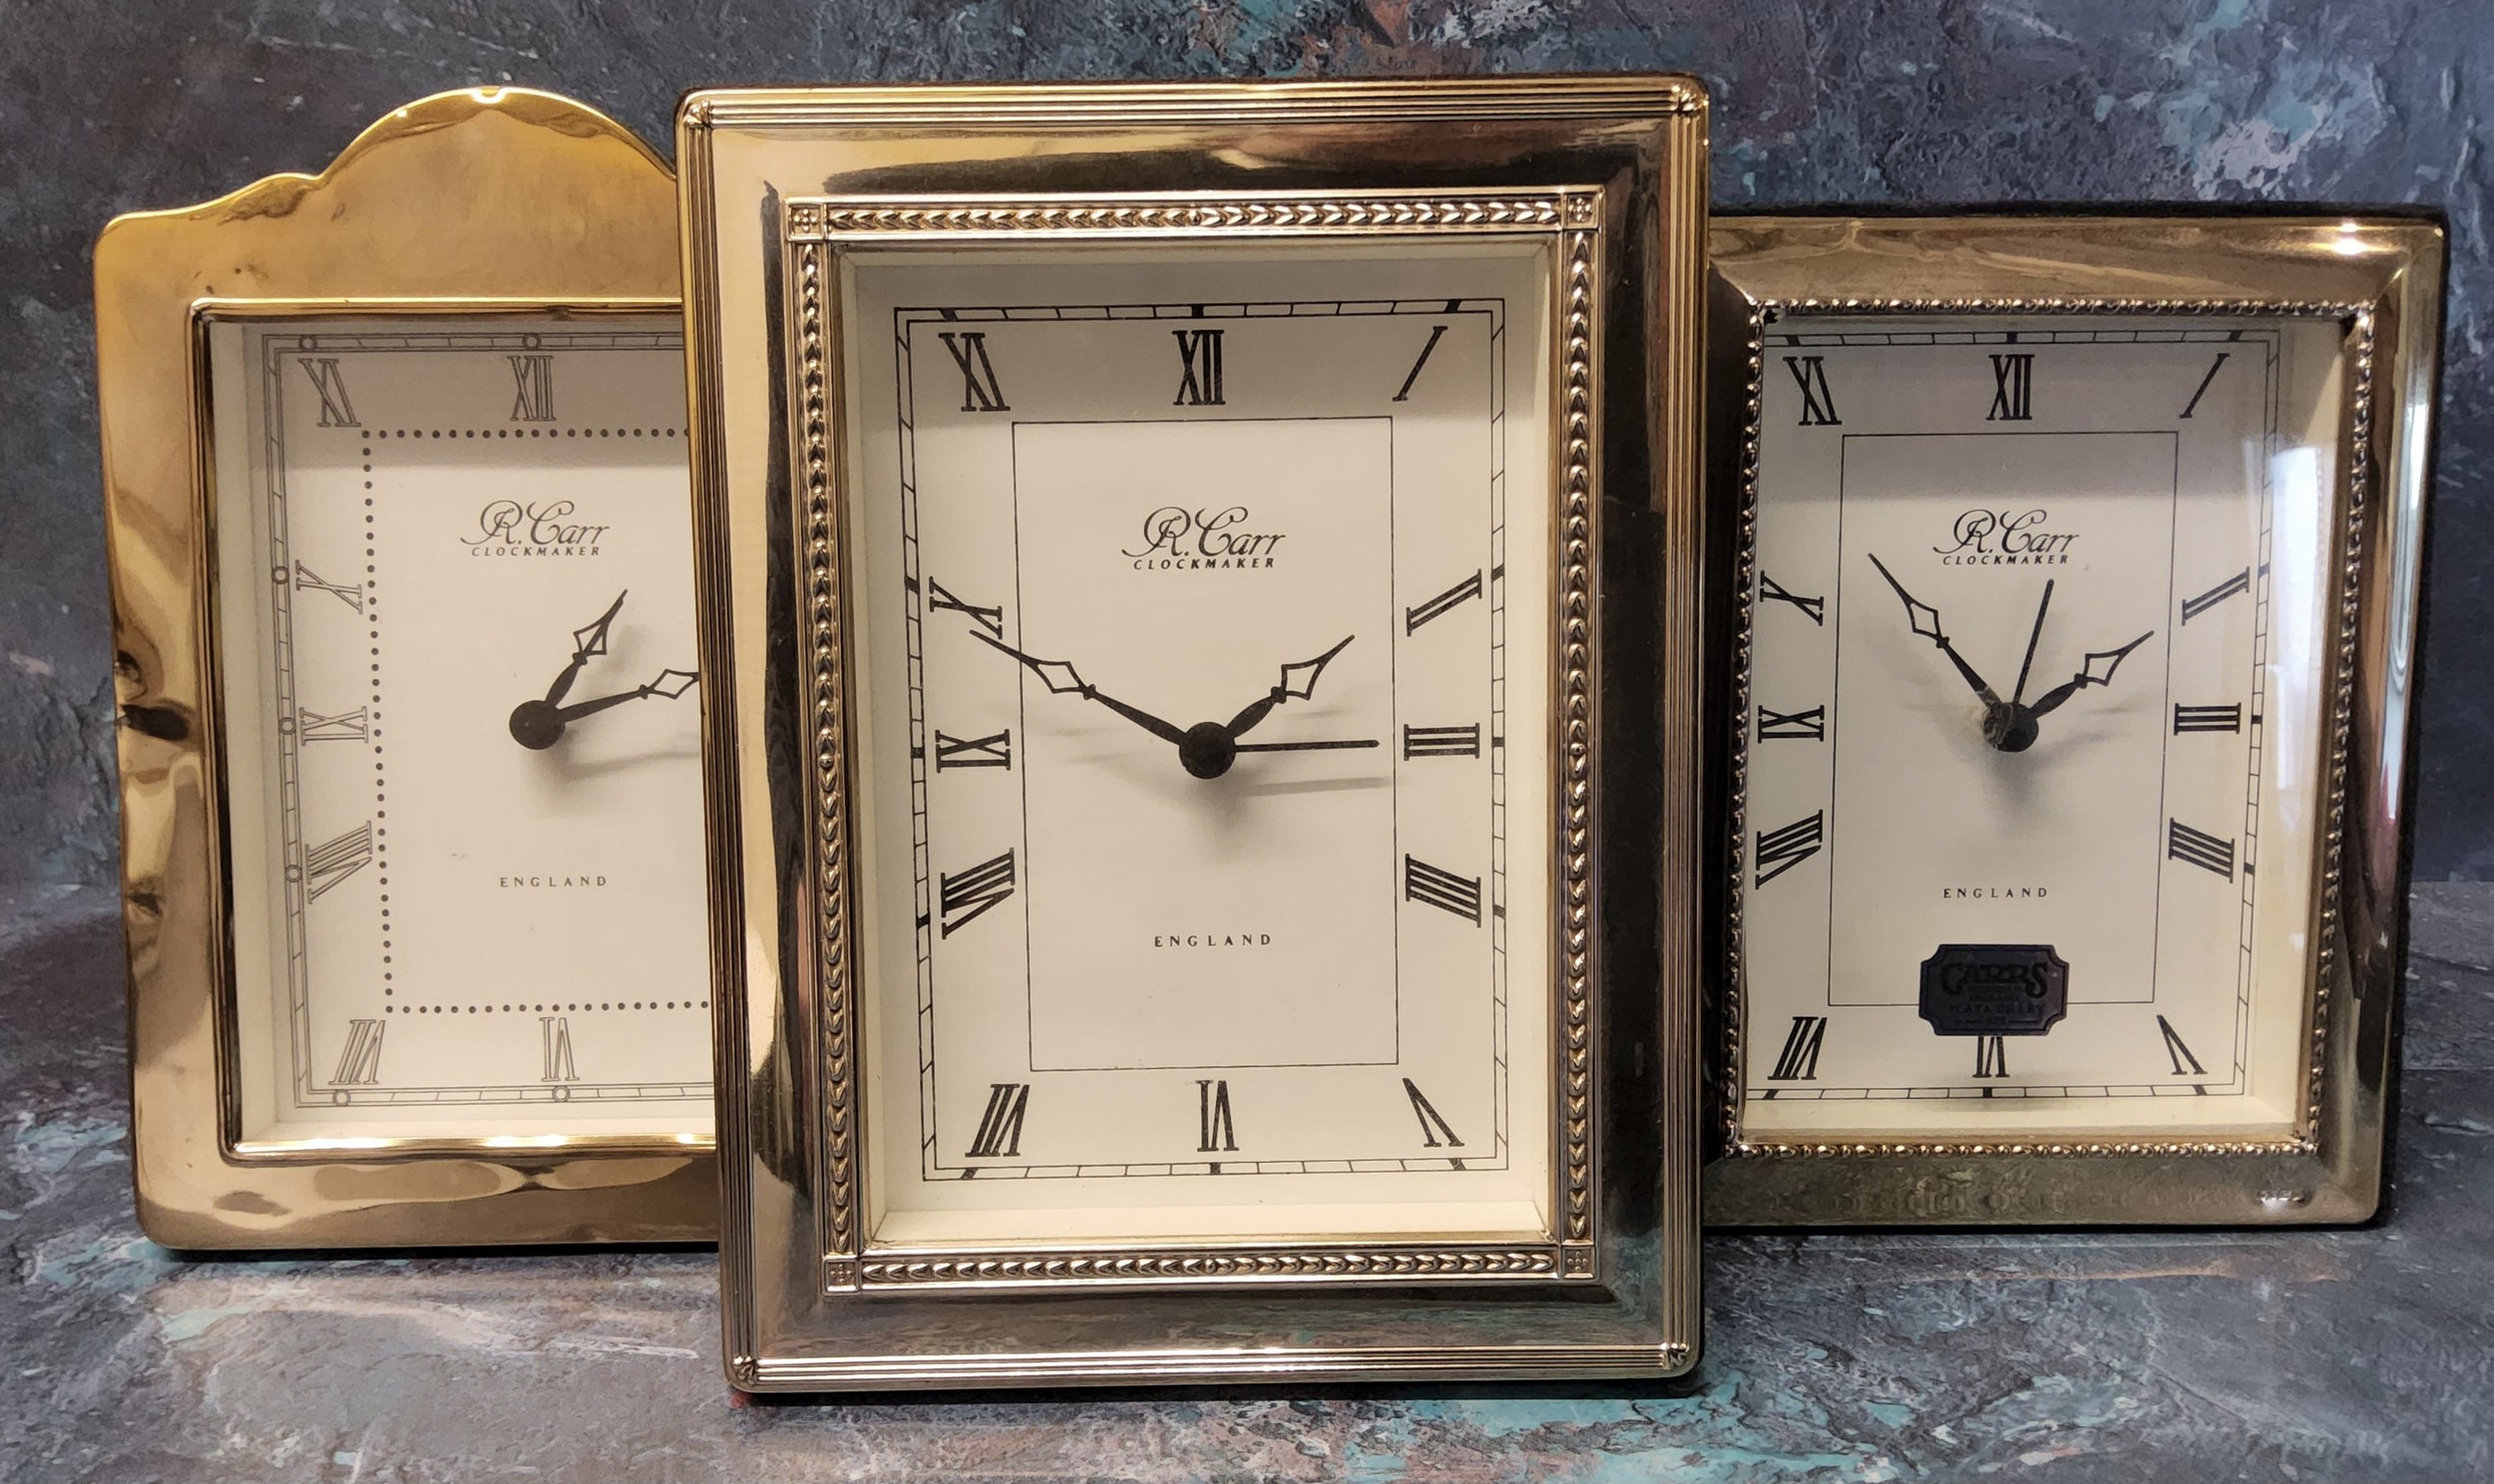 Three silver mounted alarm clocks, silver panel embossed in relief, one wood backed, two velvet